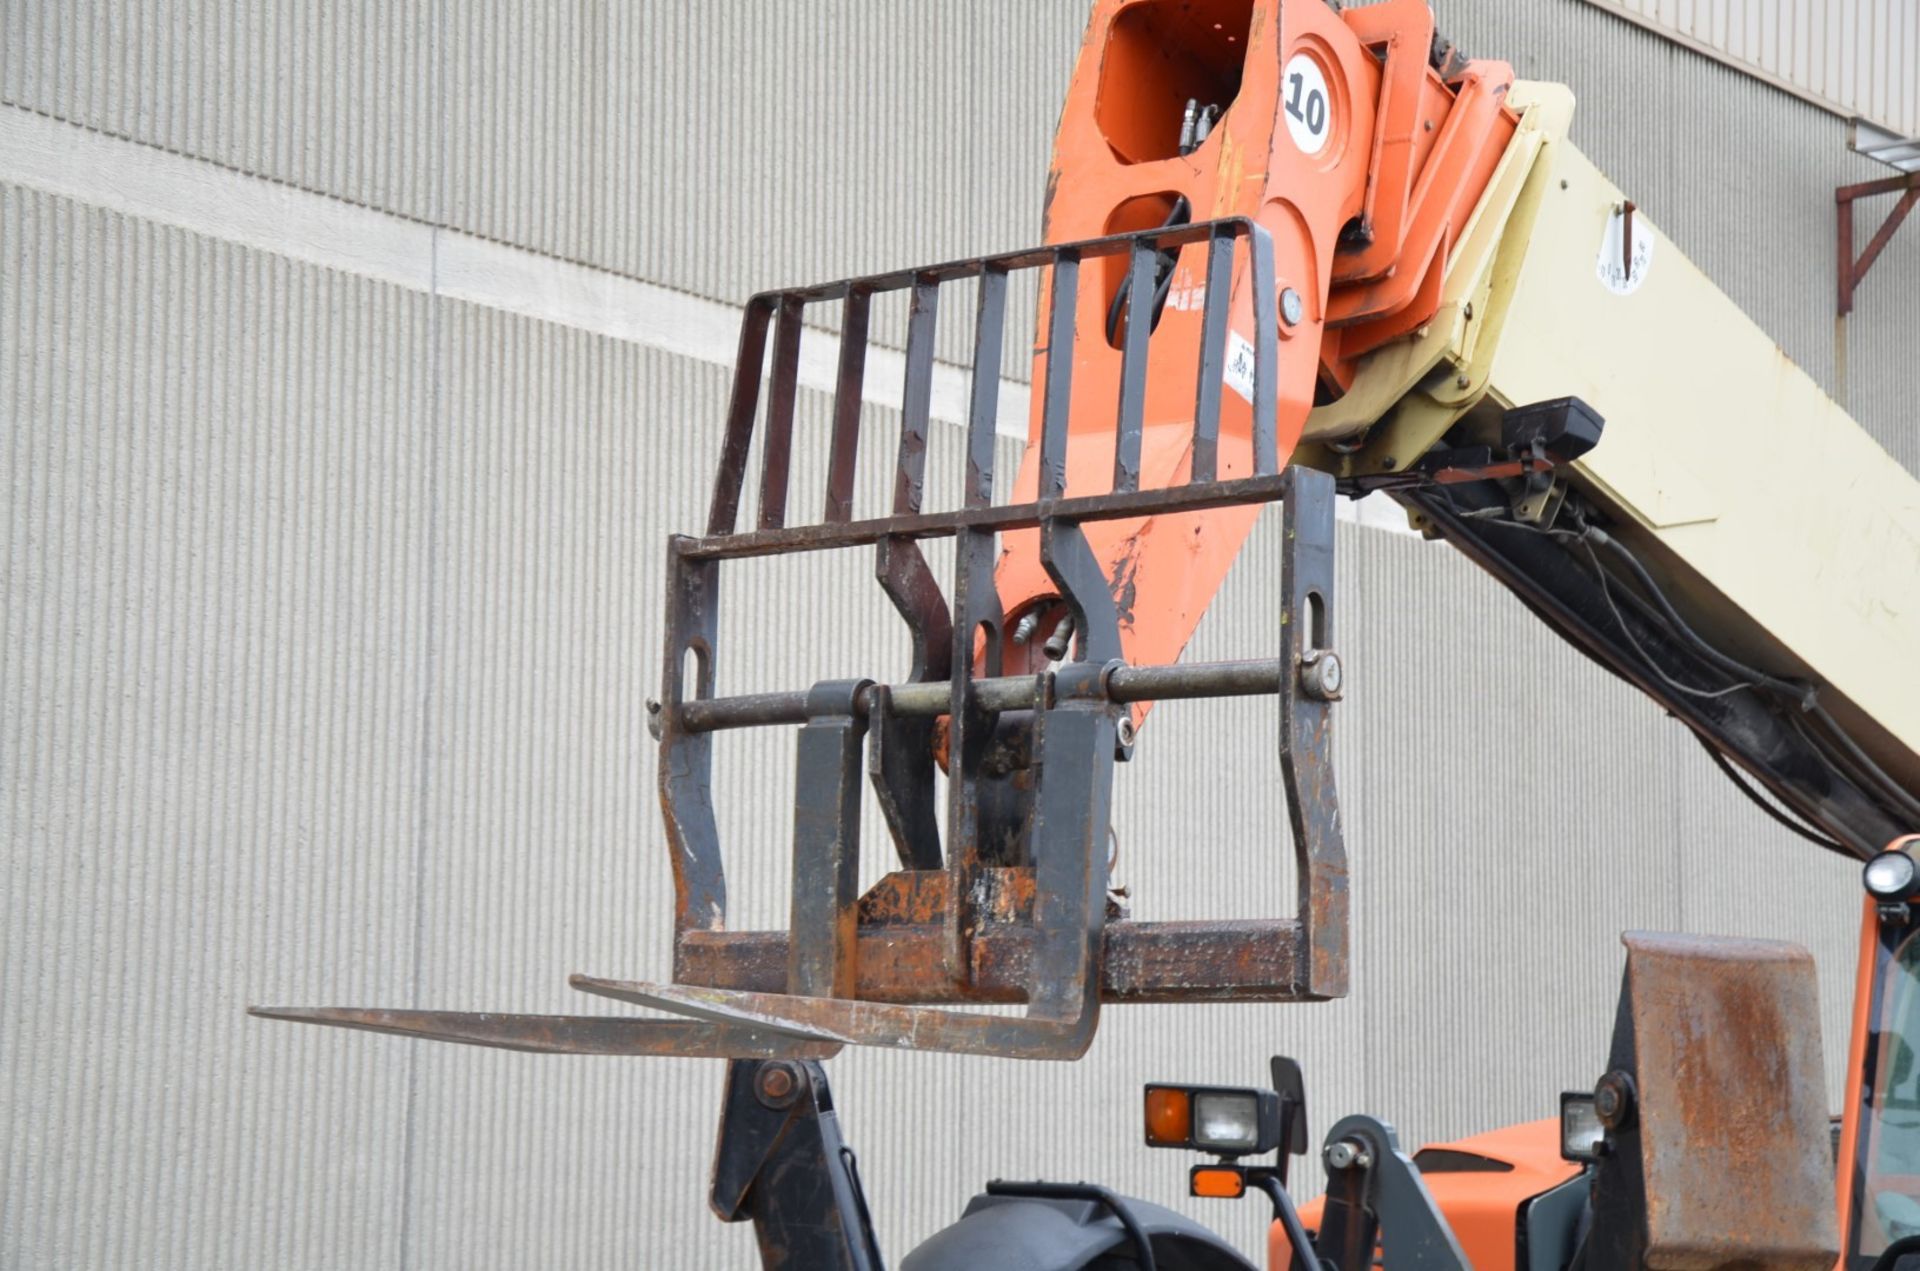 JLG (2011) G10-55A 10,000 LBS. CAPACITY DIESEL TELEHANDLER FORKLIFT WITH 56' MAX VERTICAL LIFT, - Image 8 of 23